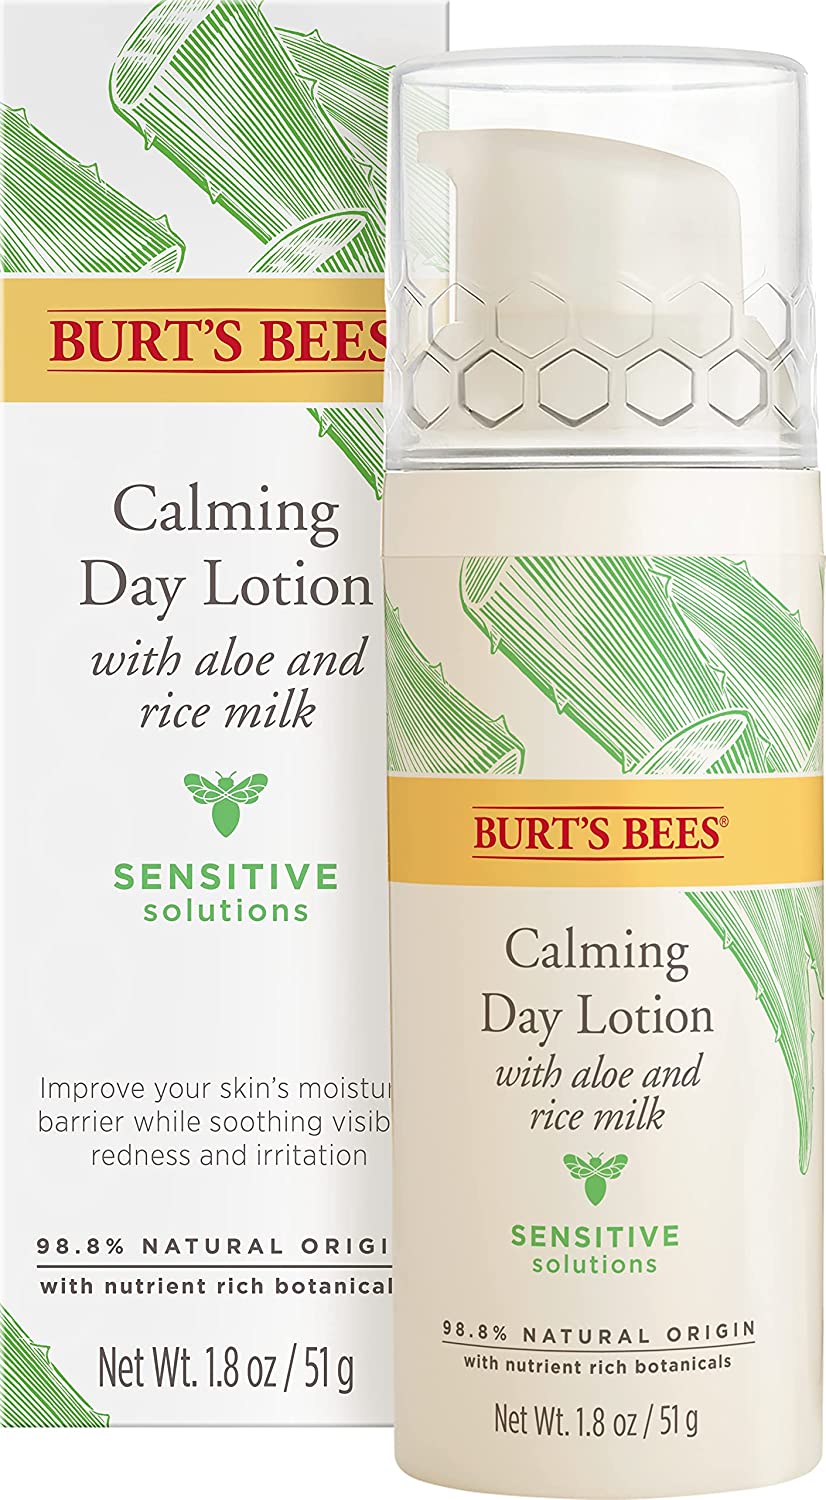 Burt's Bees Sensitive Solutions Calming Day Lotion with Aloe and Rice Milk 1.8 FL oz (51g)